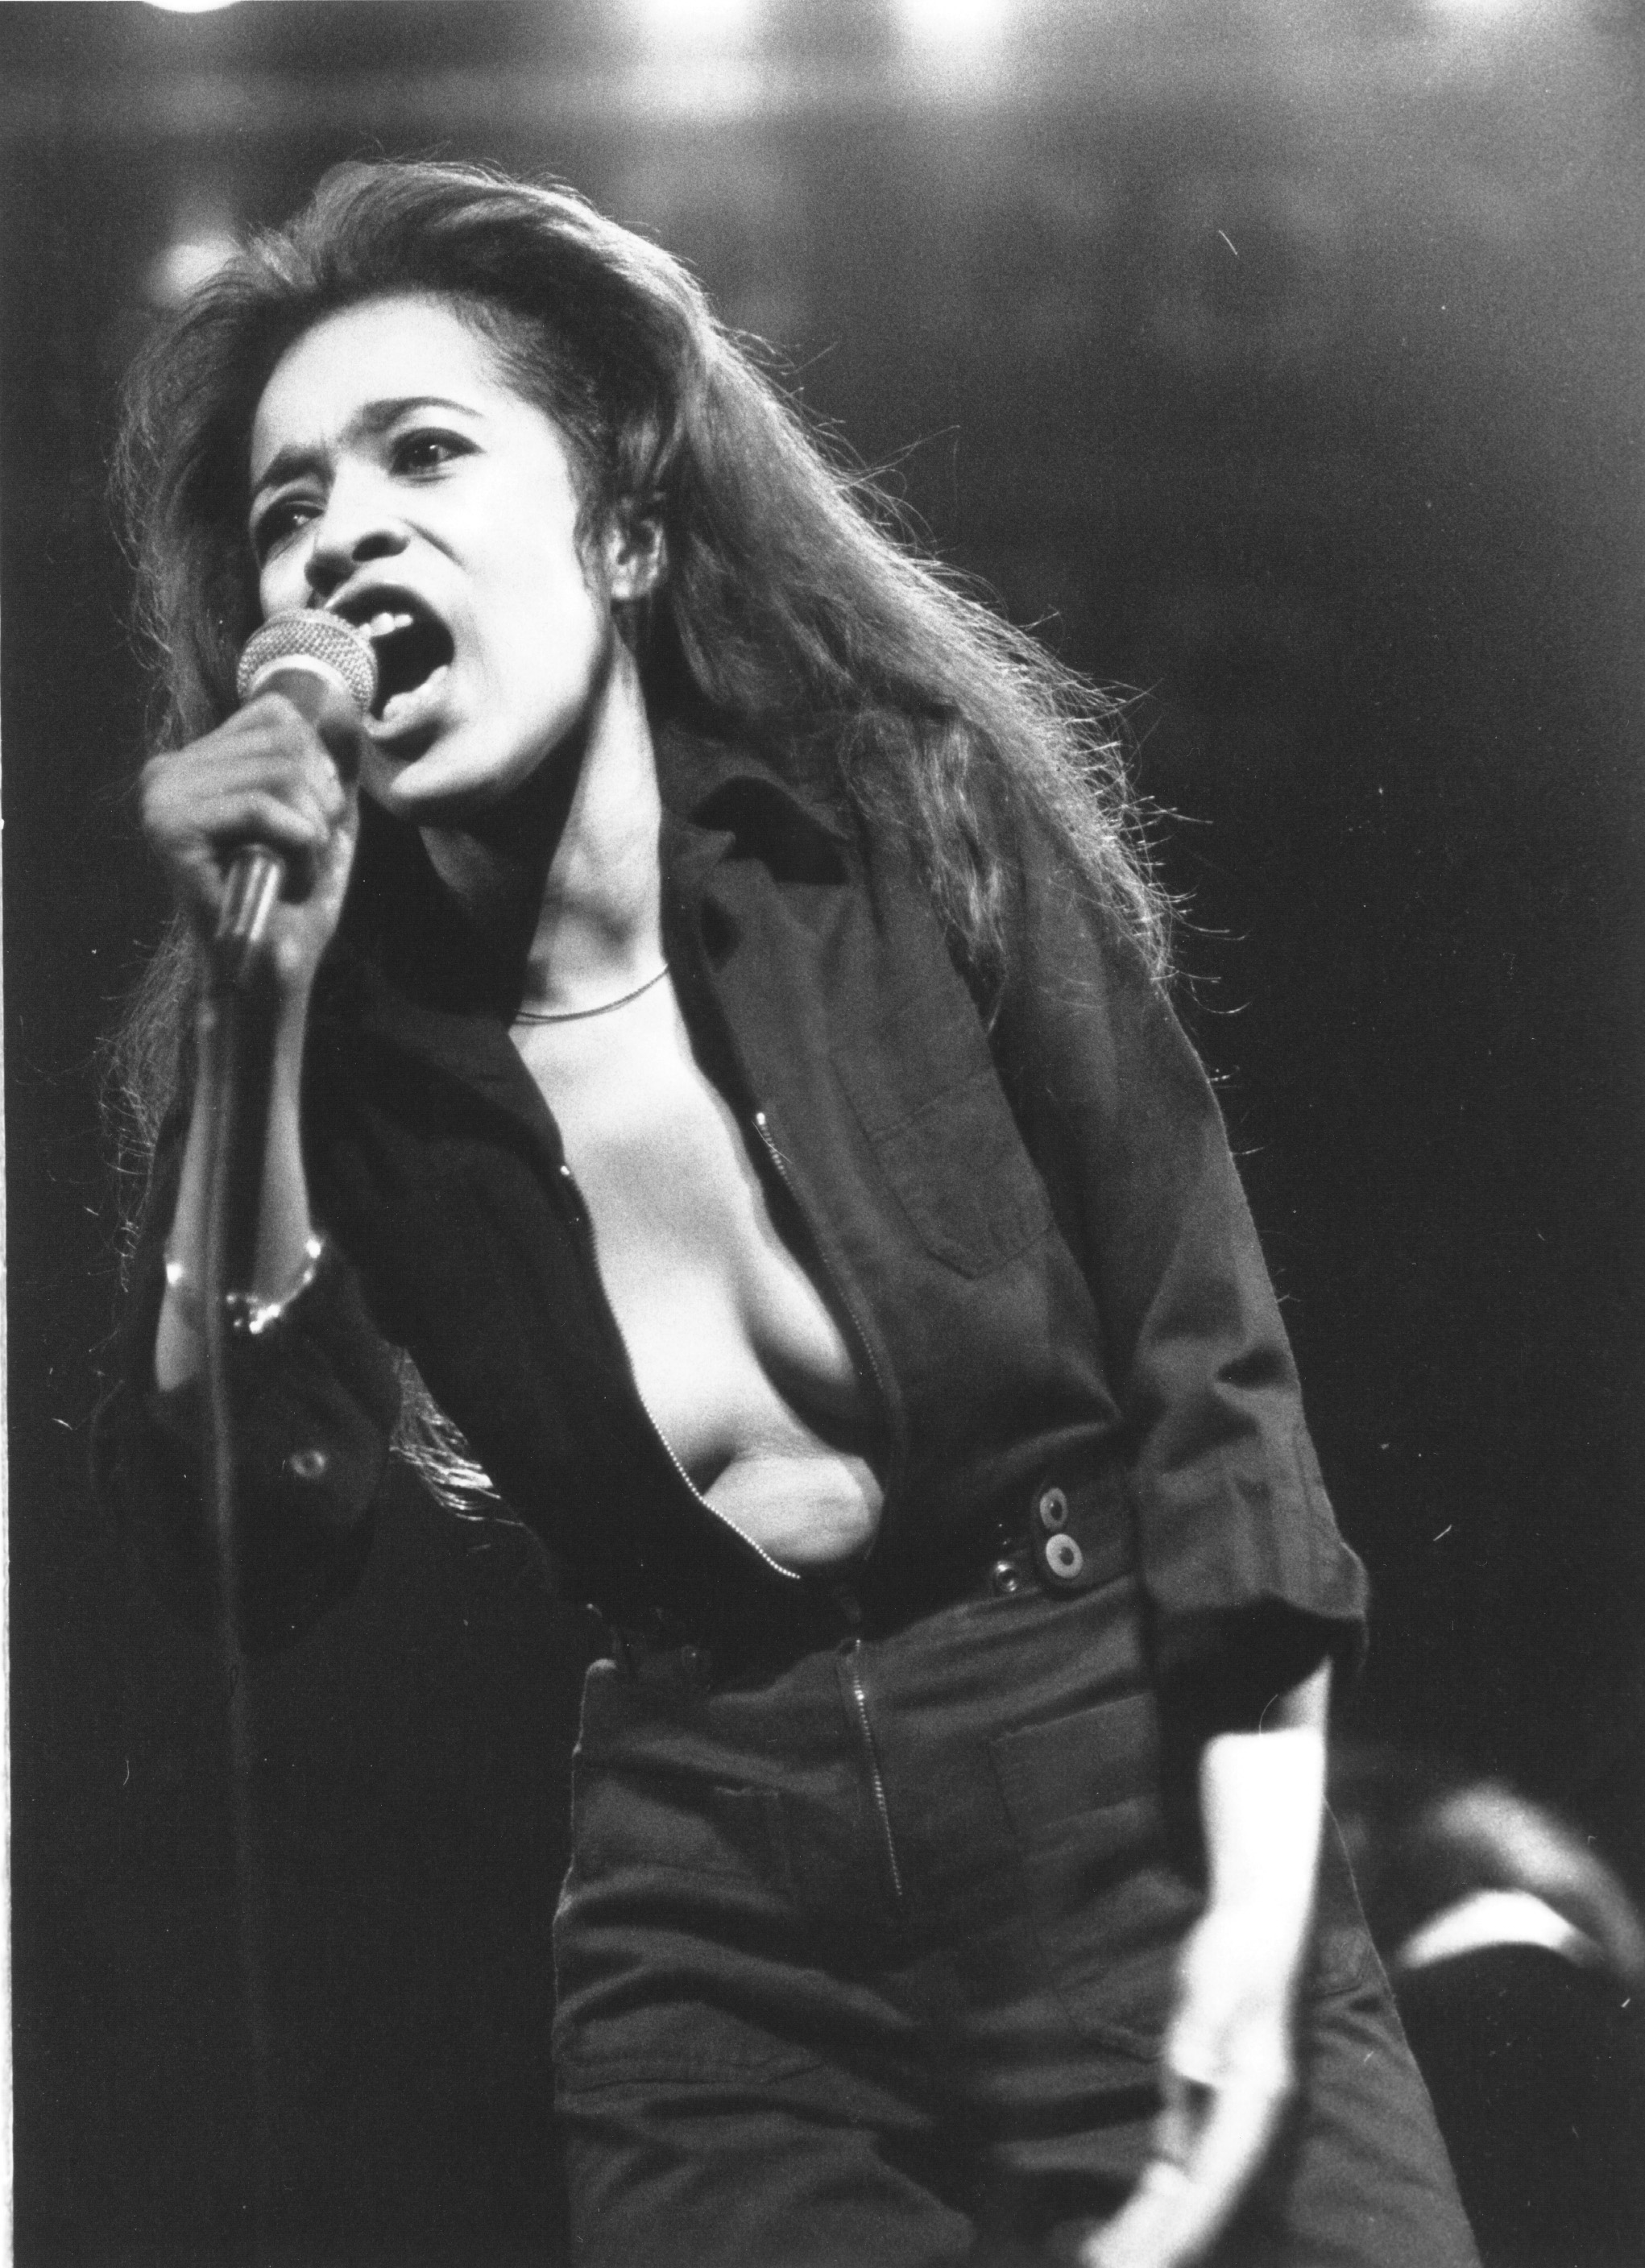 ronnie spector singing into the microphone on stage in a low cut shirt 1977